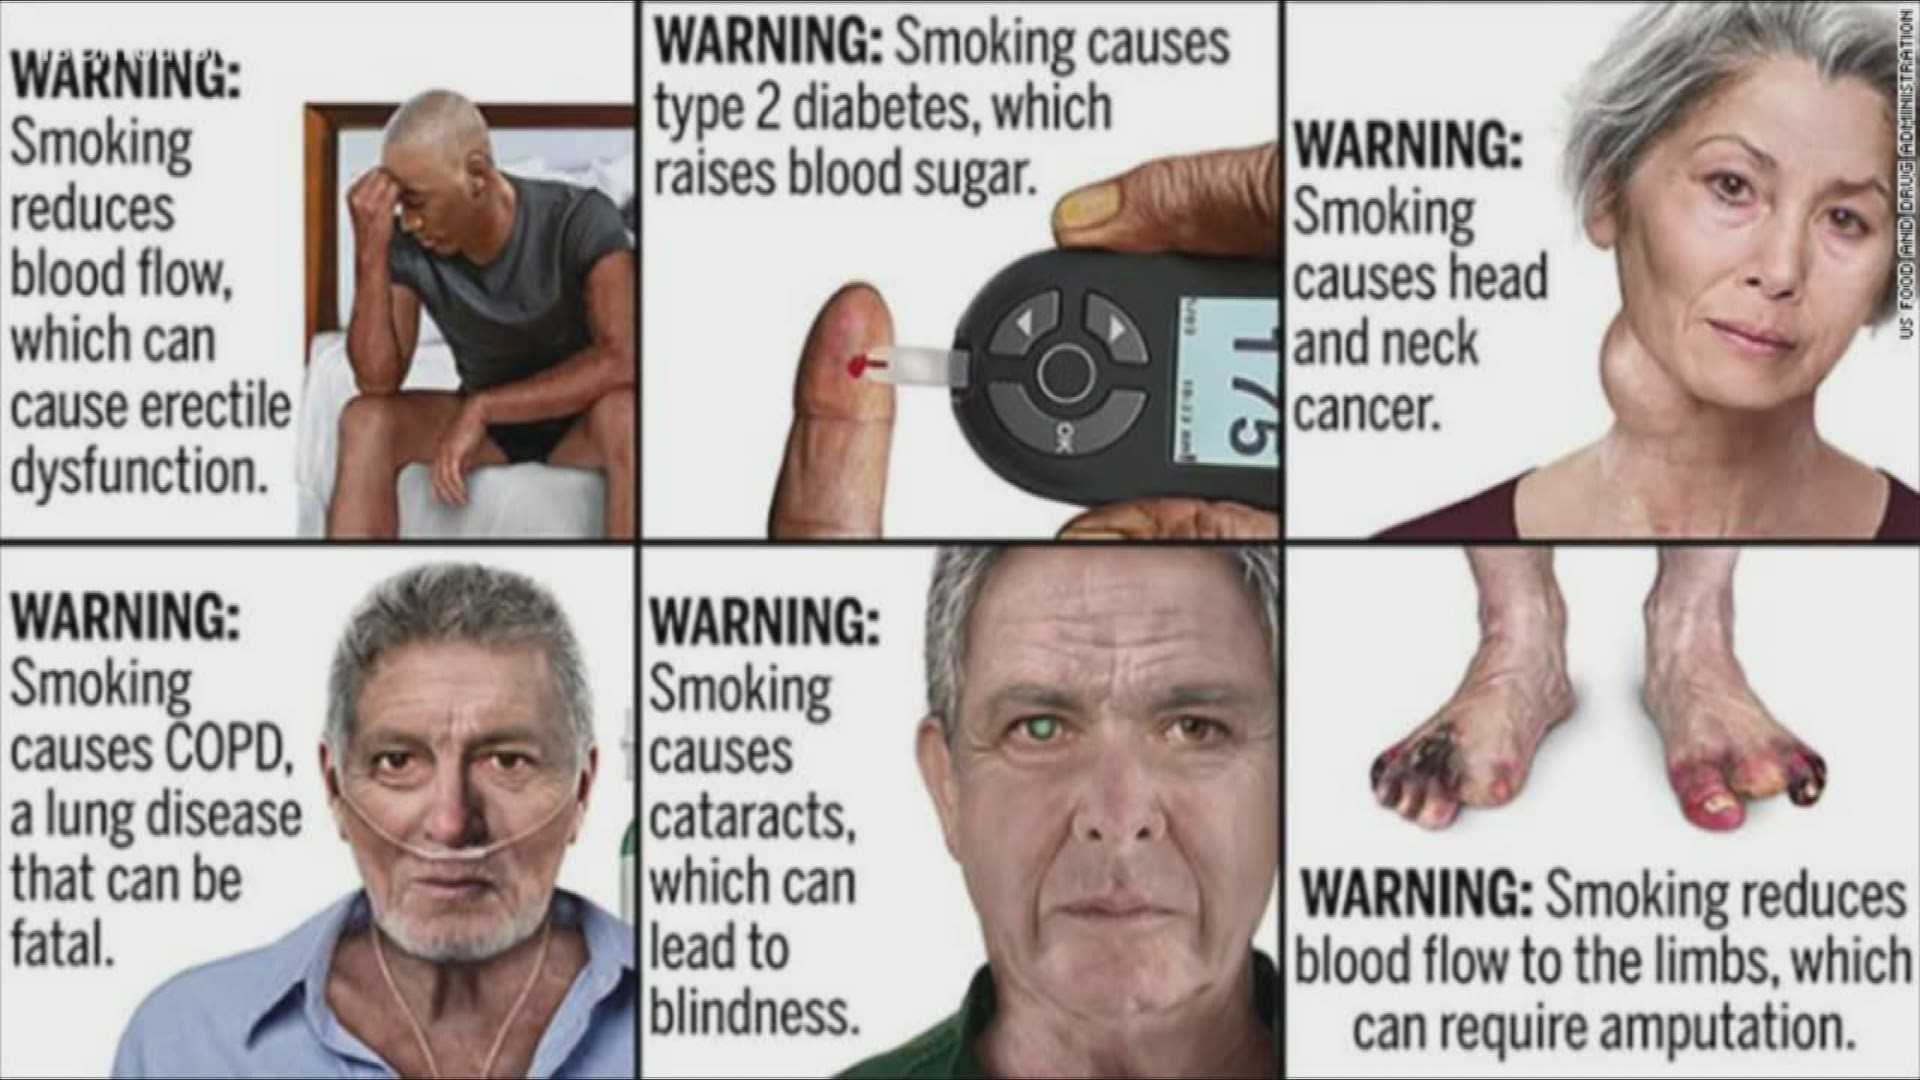 13 warnings have been proposed to appear on all cigarettes.